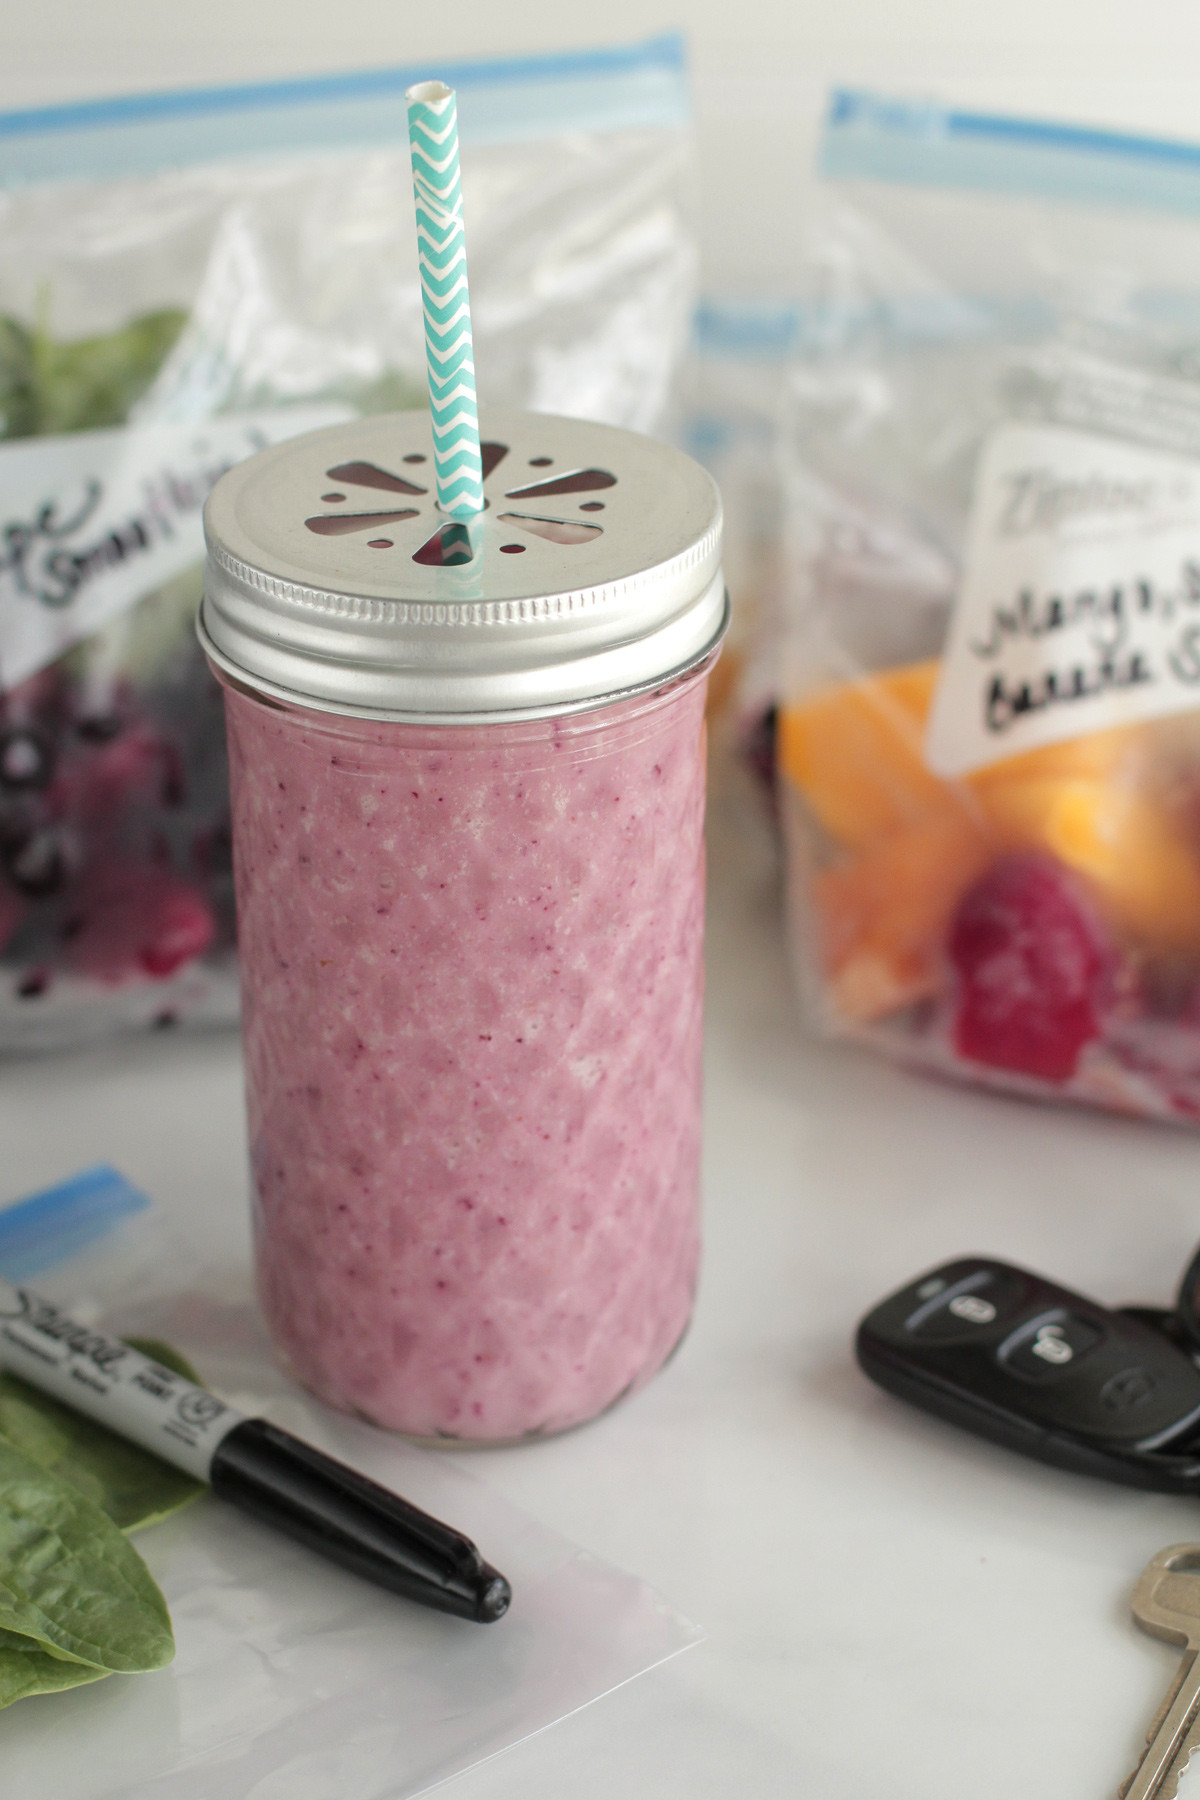 Diy Healthy Smoothies
 DIY Freezer Smoothie Packs 5 Recipes to Get You Started